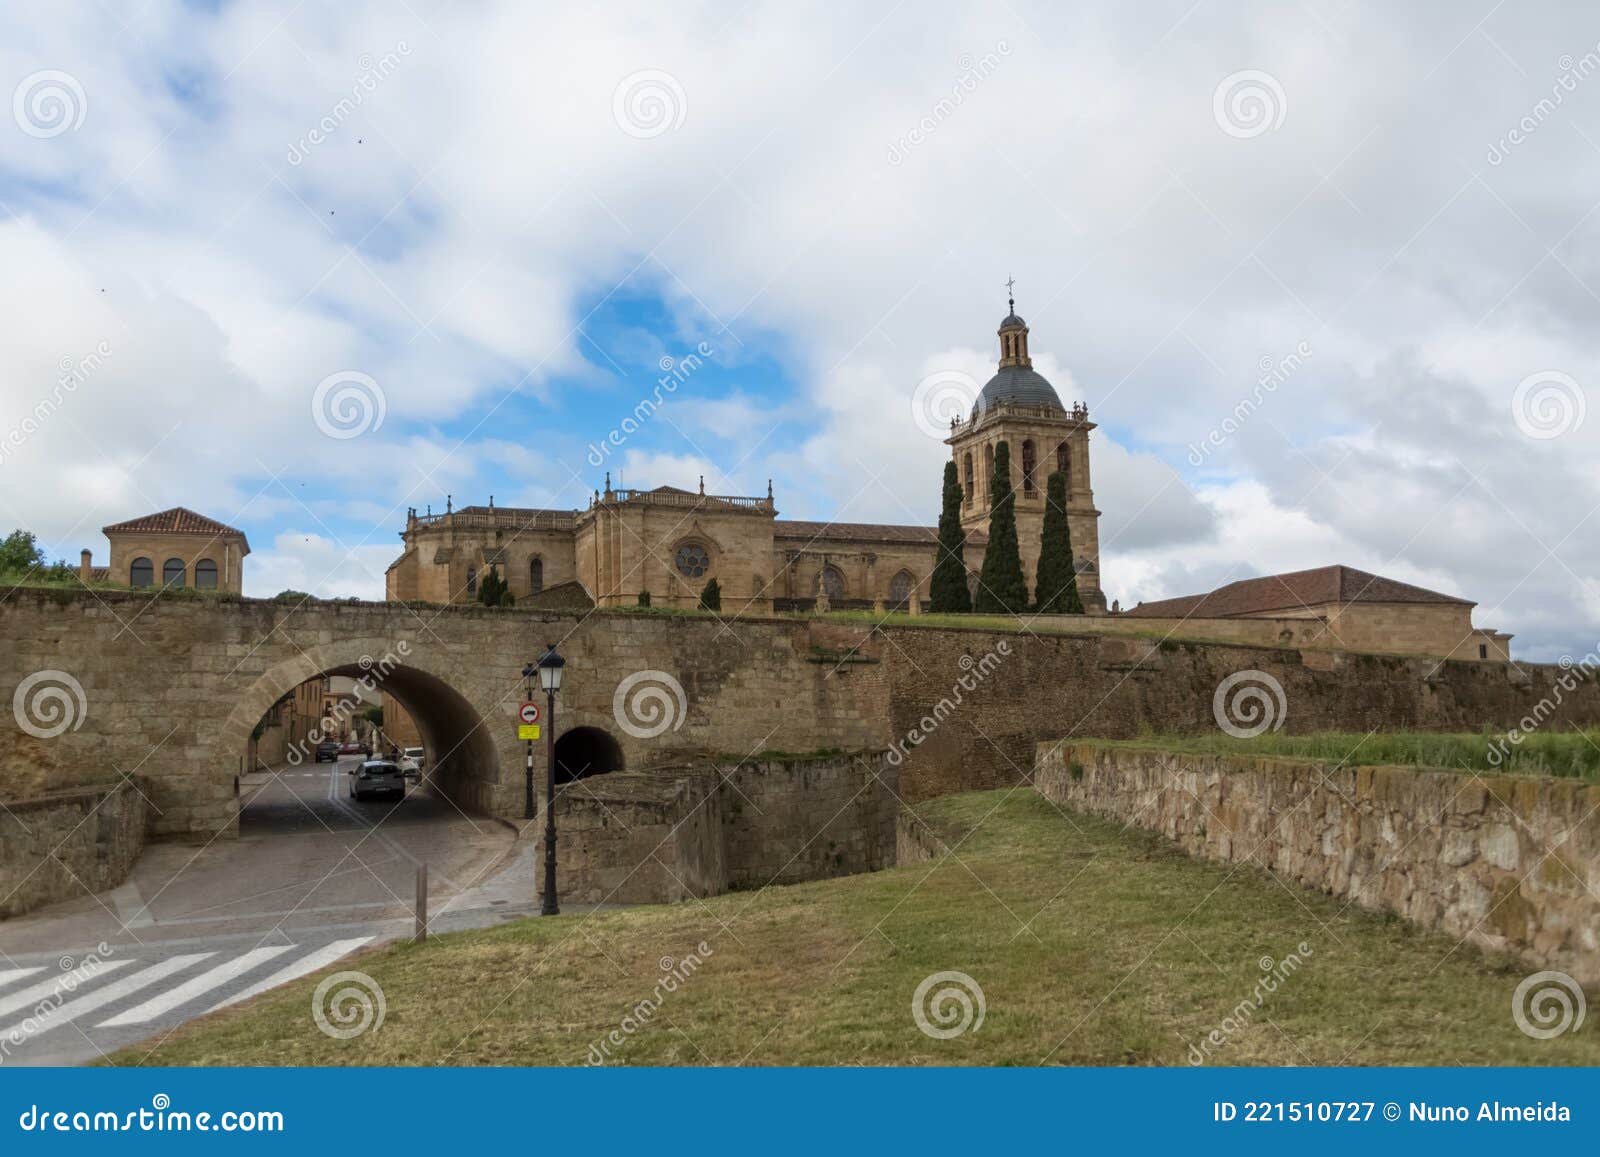 majestic front view at the fortress gate and iconic spanish romanesque architecture building at the cuidad rodrigo cathedral,